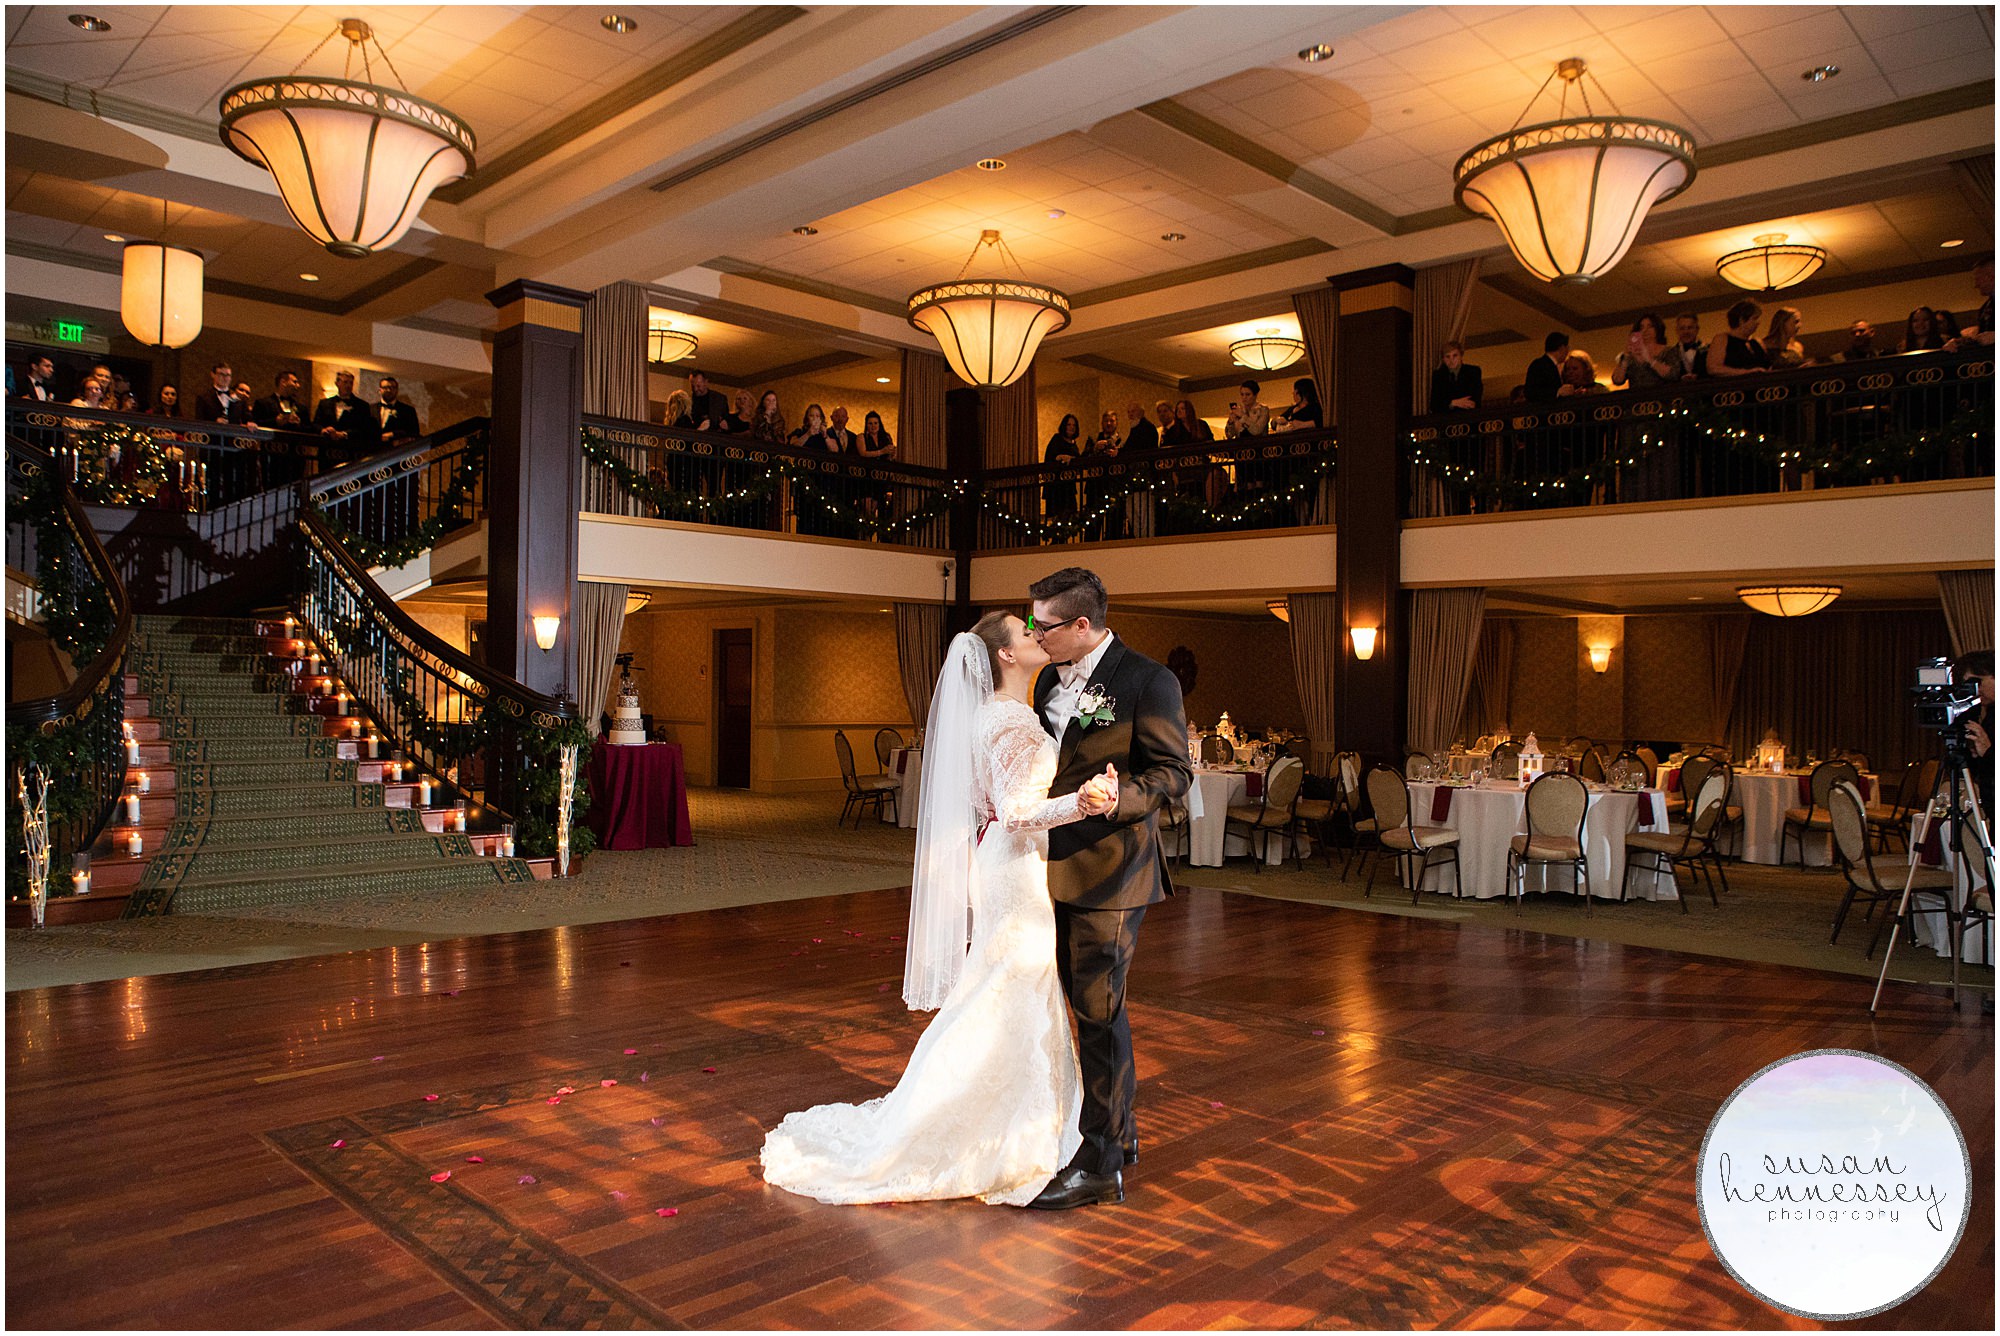 First dance at Collingswood Grand Ballroom Wedding